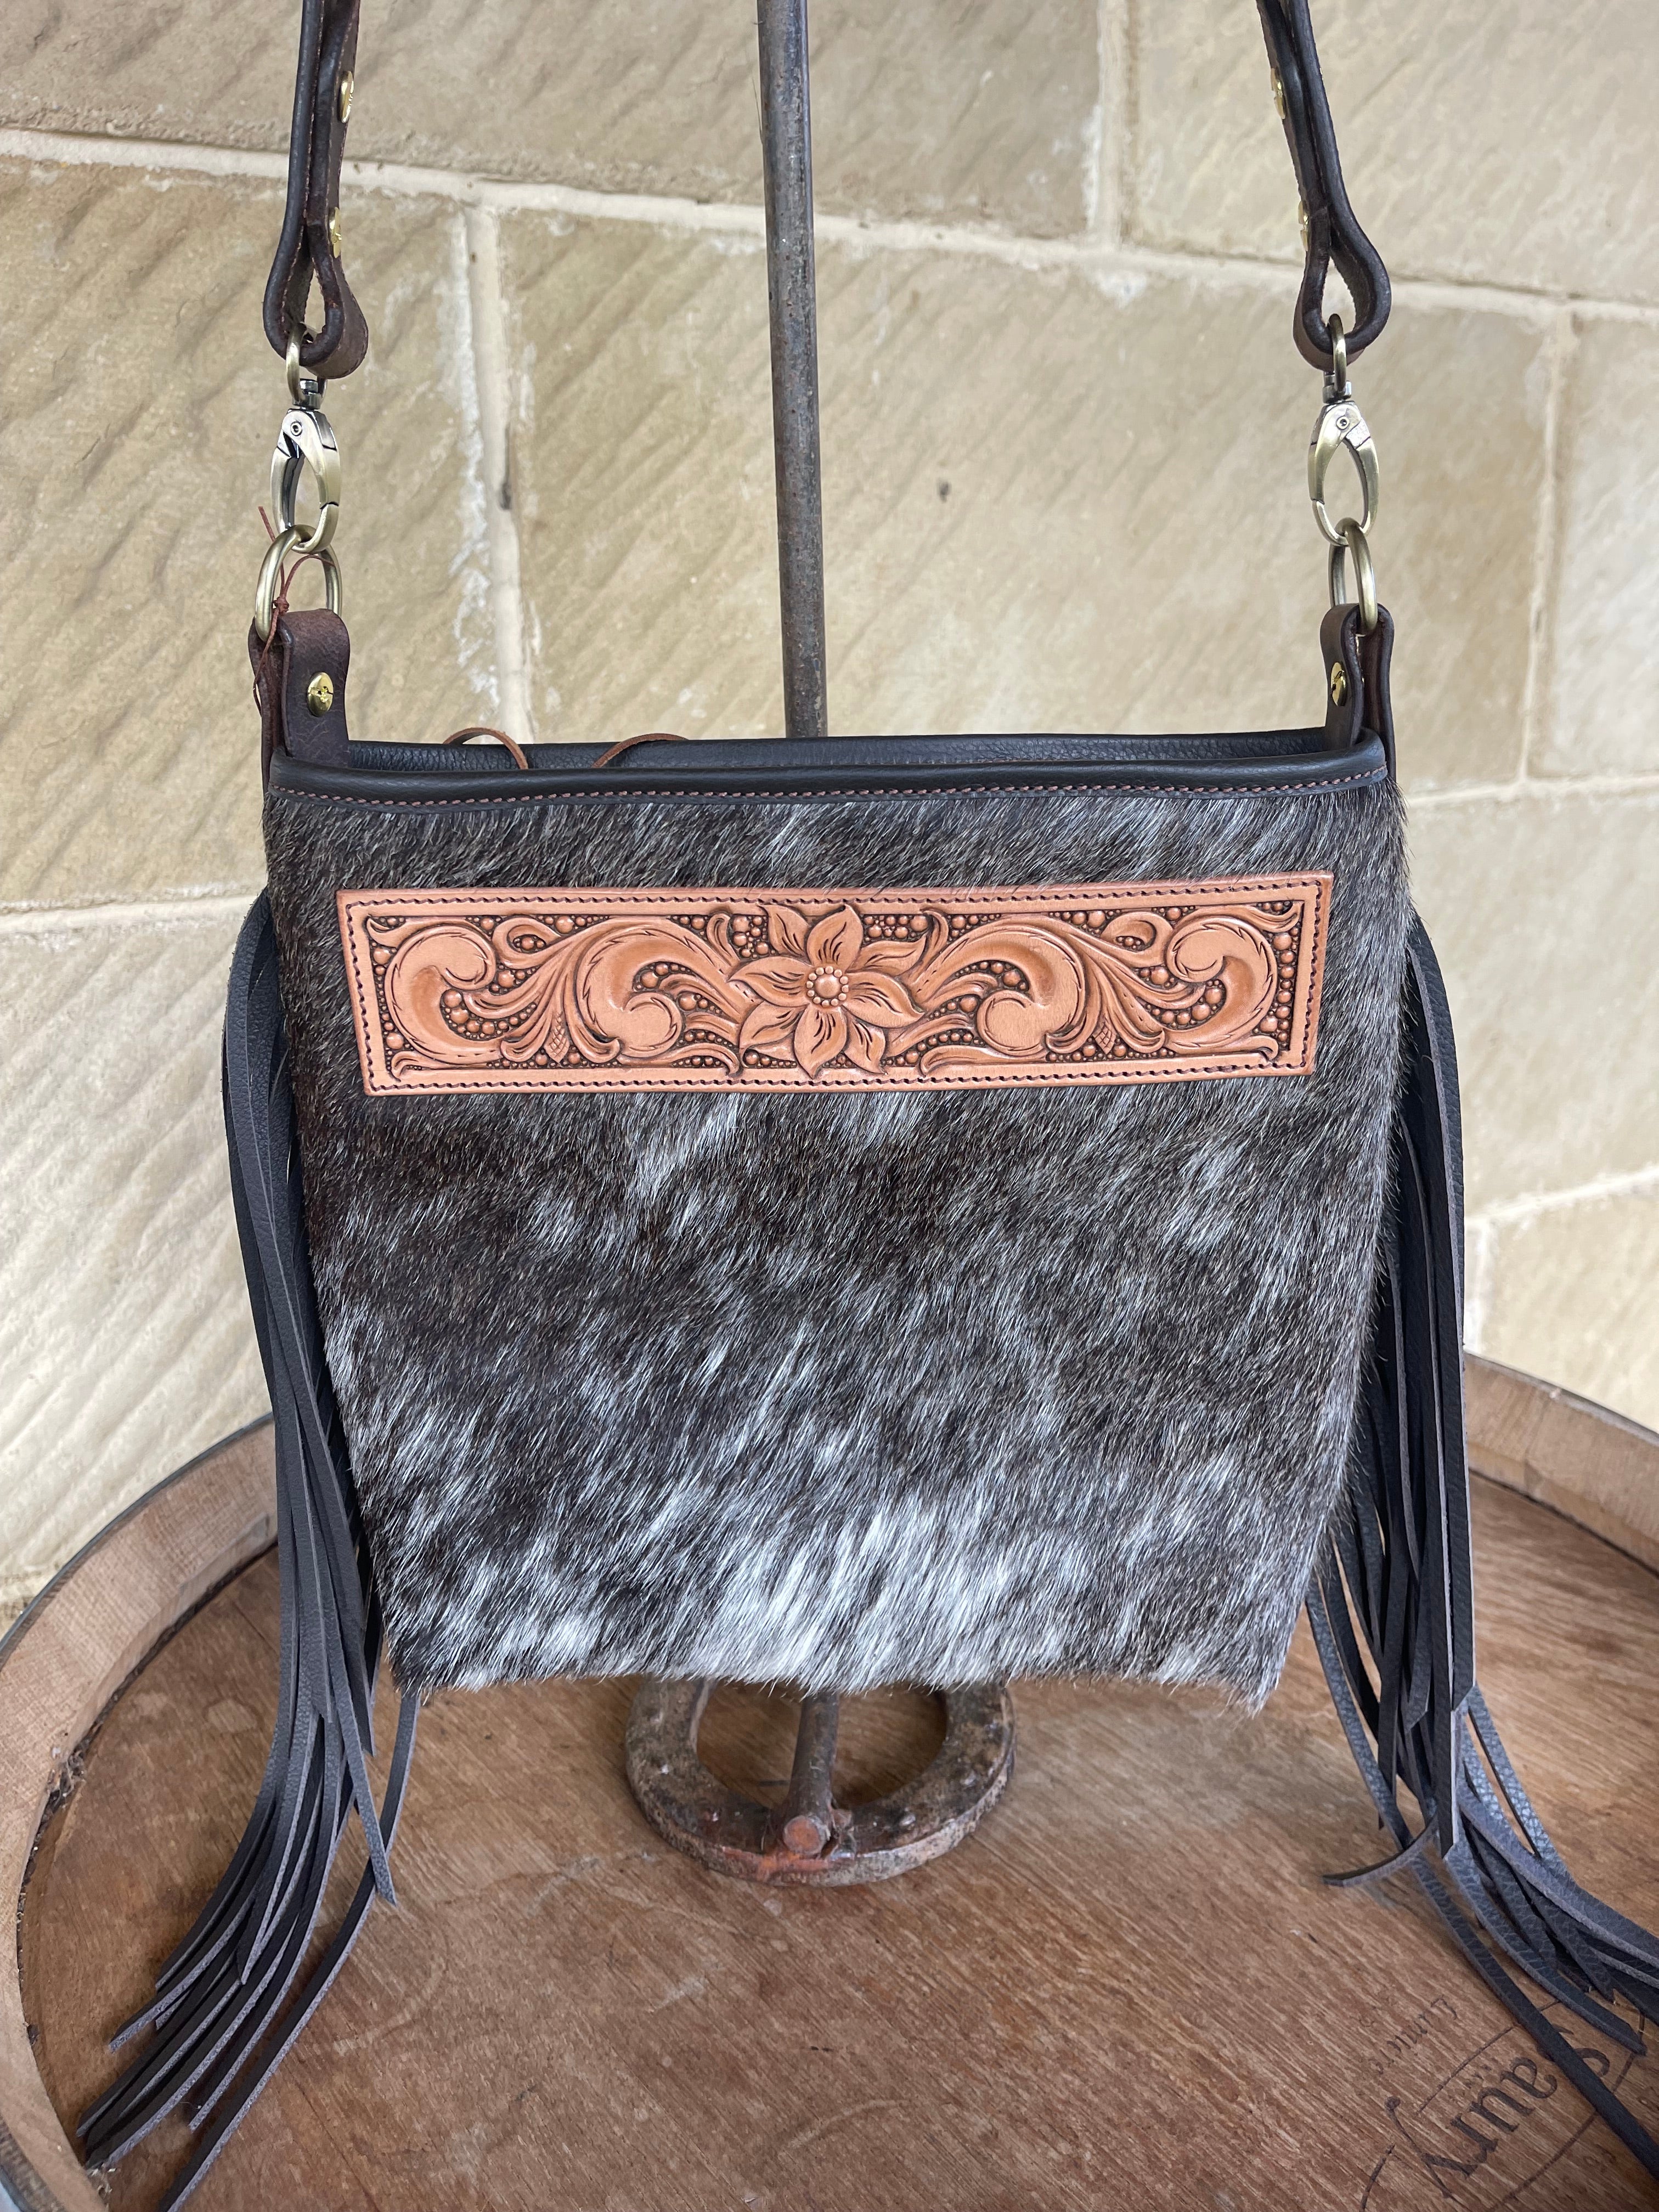 Cowhide crossbody fringe bag with unique floral carving